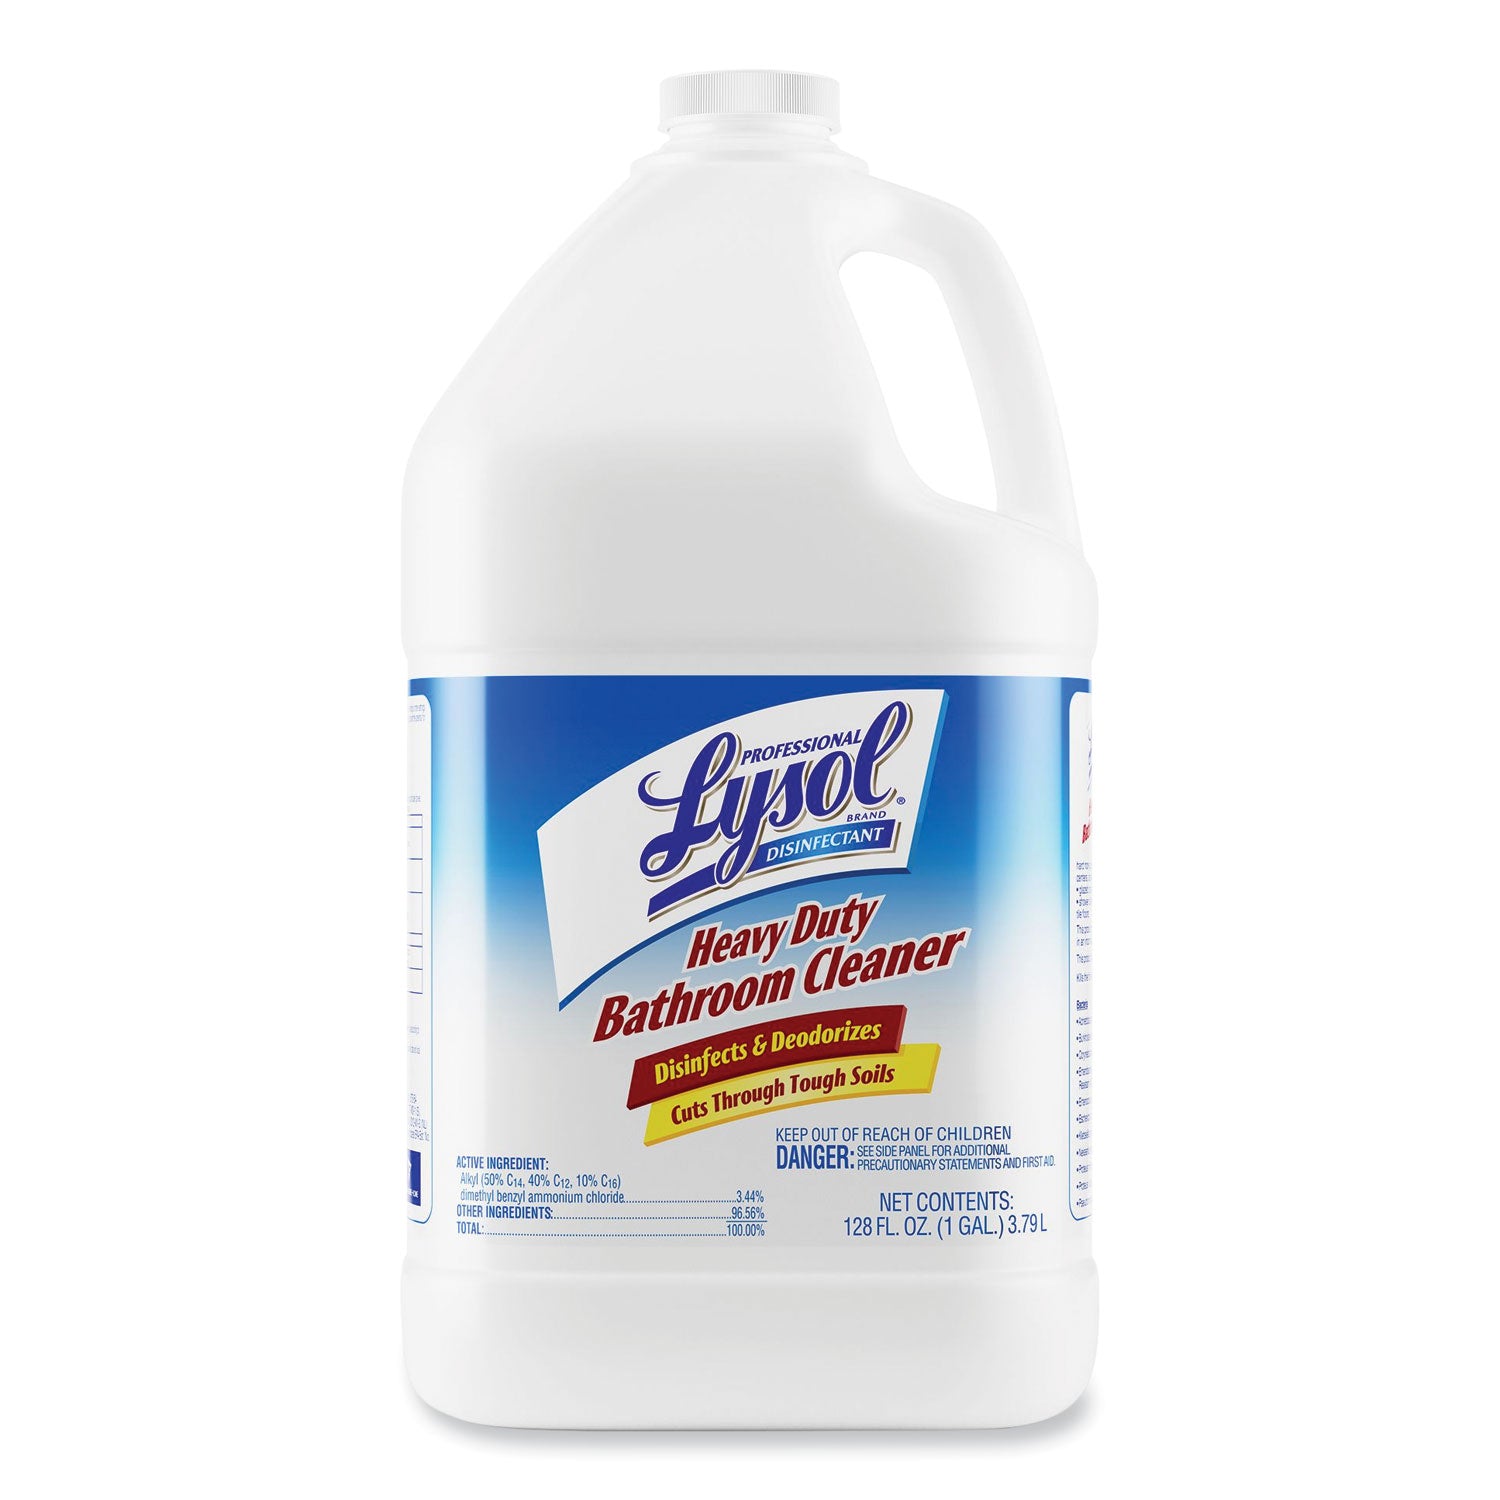 Disinfectant Heavy-Duty Bathroom Cleaner Concentrate, 1 gal Bottle, 4/Carton - 